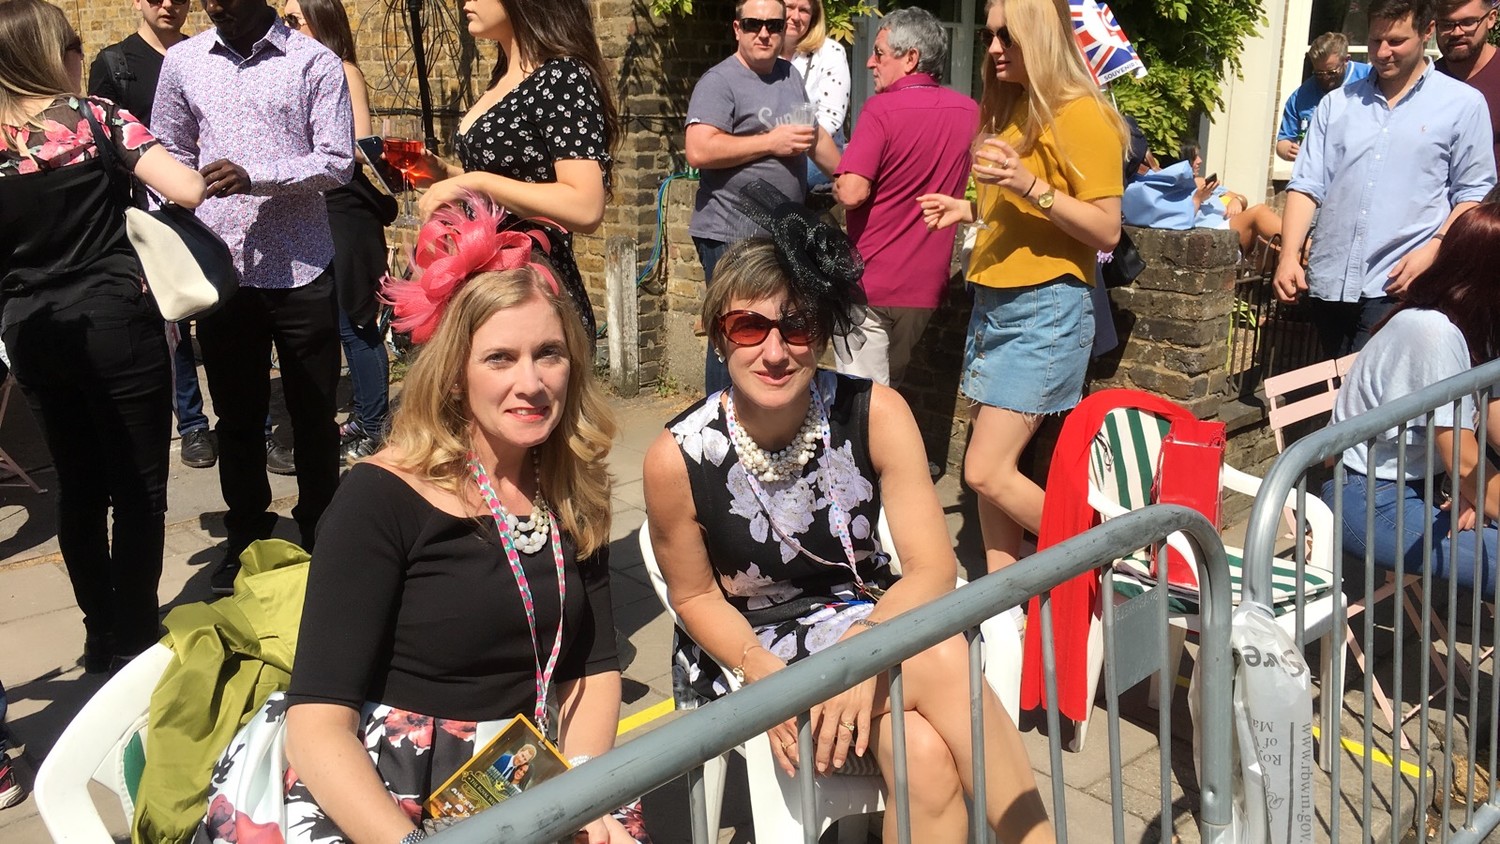 Cara Maloney and Nanette Lavin watched the royal wedding in England last month after they won a contest from “The Today Show.”